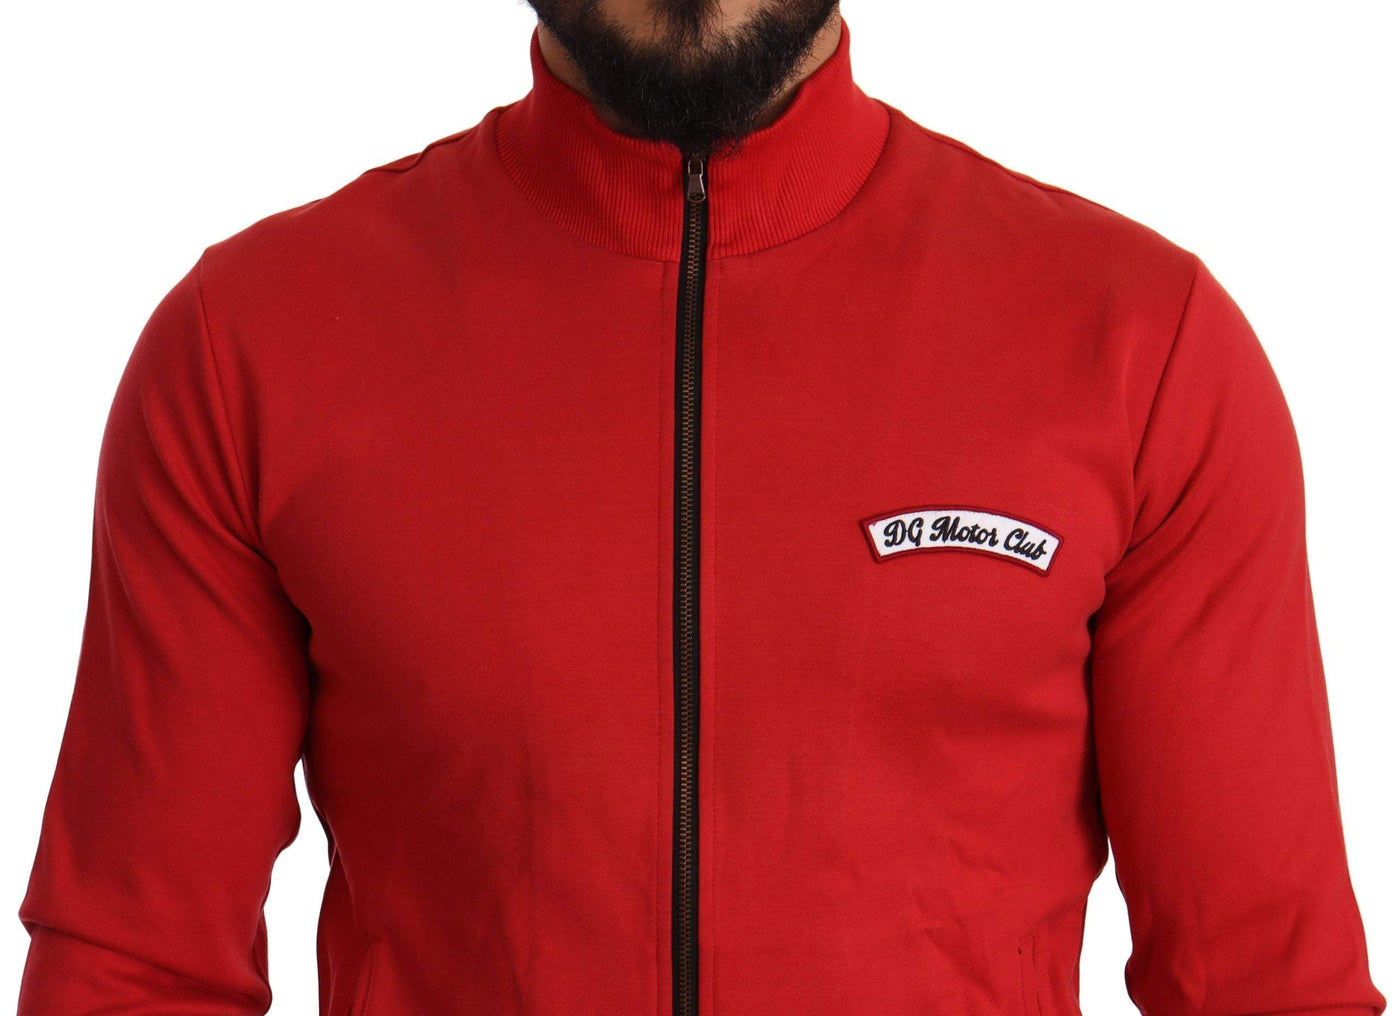 Dolce & Gabbana Red DG Motor Club Zipper Stretch Sweater #men, Dolce & Gabbana, feed-agegroup-adult, feed-color-Red, feed-gender-male, IT44 | XS, IT46 | S, IT48 | M, IT52 | XL, IT54 | XXL, Red, Sweaters - Men - Clothing at SEYMAYKA